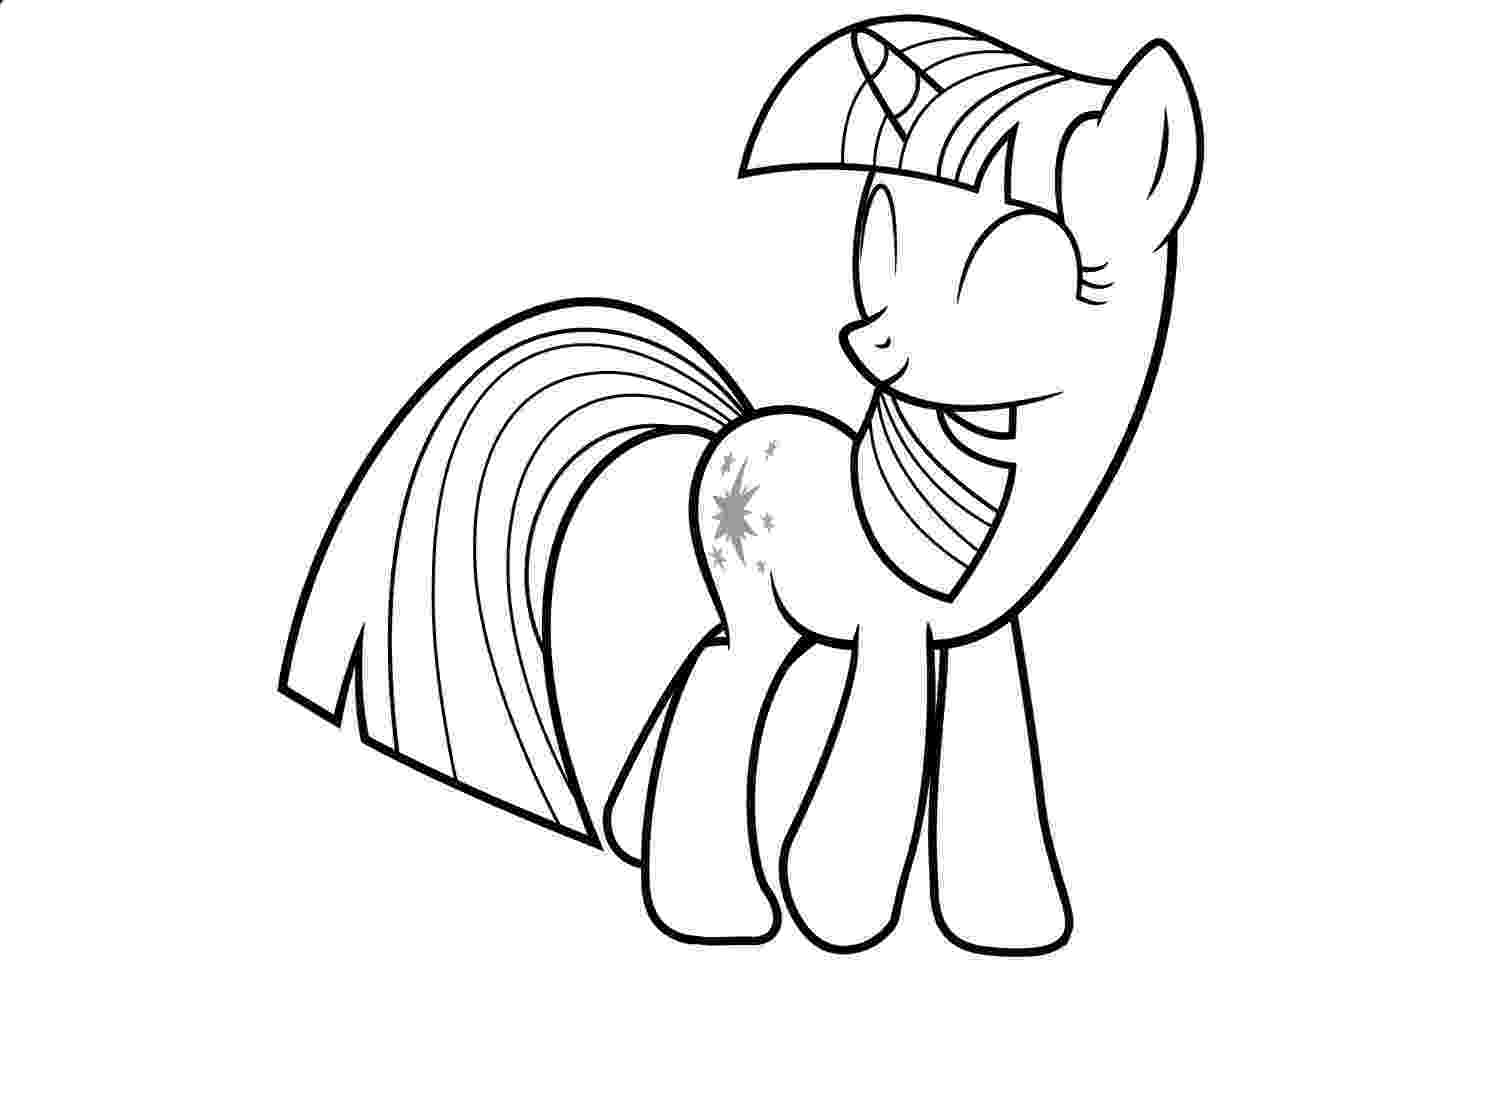 twilight my little pony coloring pages my little pony twilight sparkle coloring pages pony little twilight pages my coloring 